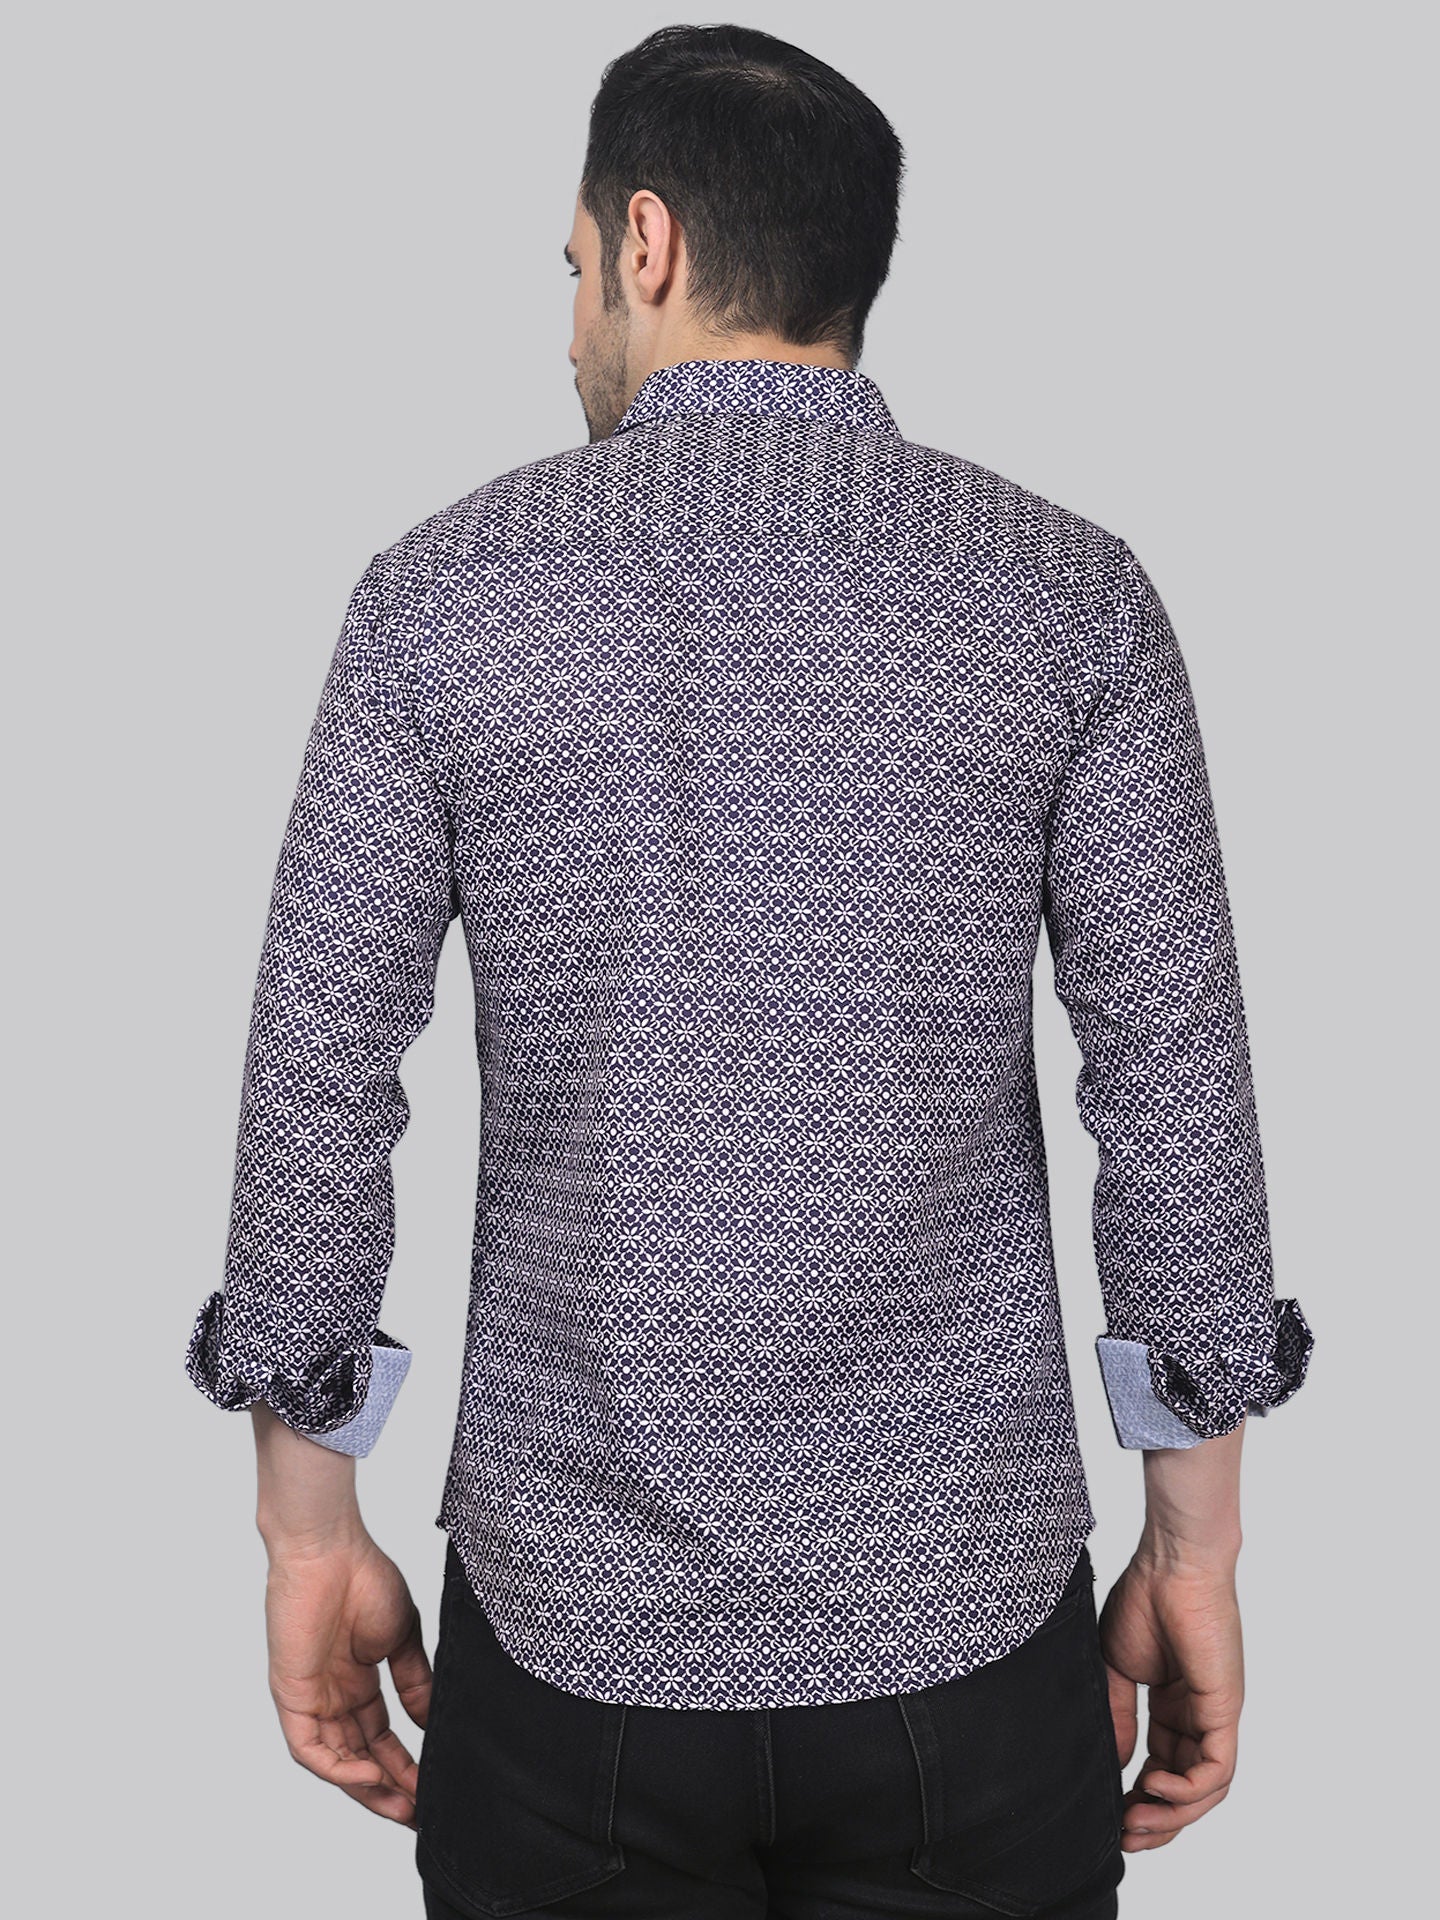 TryBuy Trending Full Sleeve Casual Cotton Printed Shirt for Men - TryBuy® USA🇺🇸